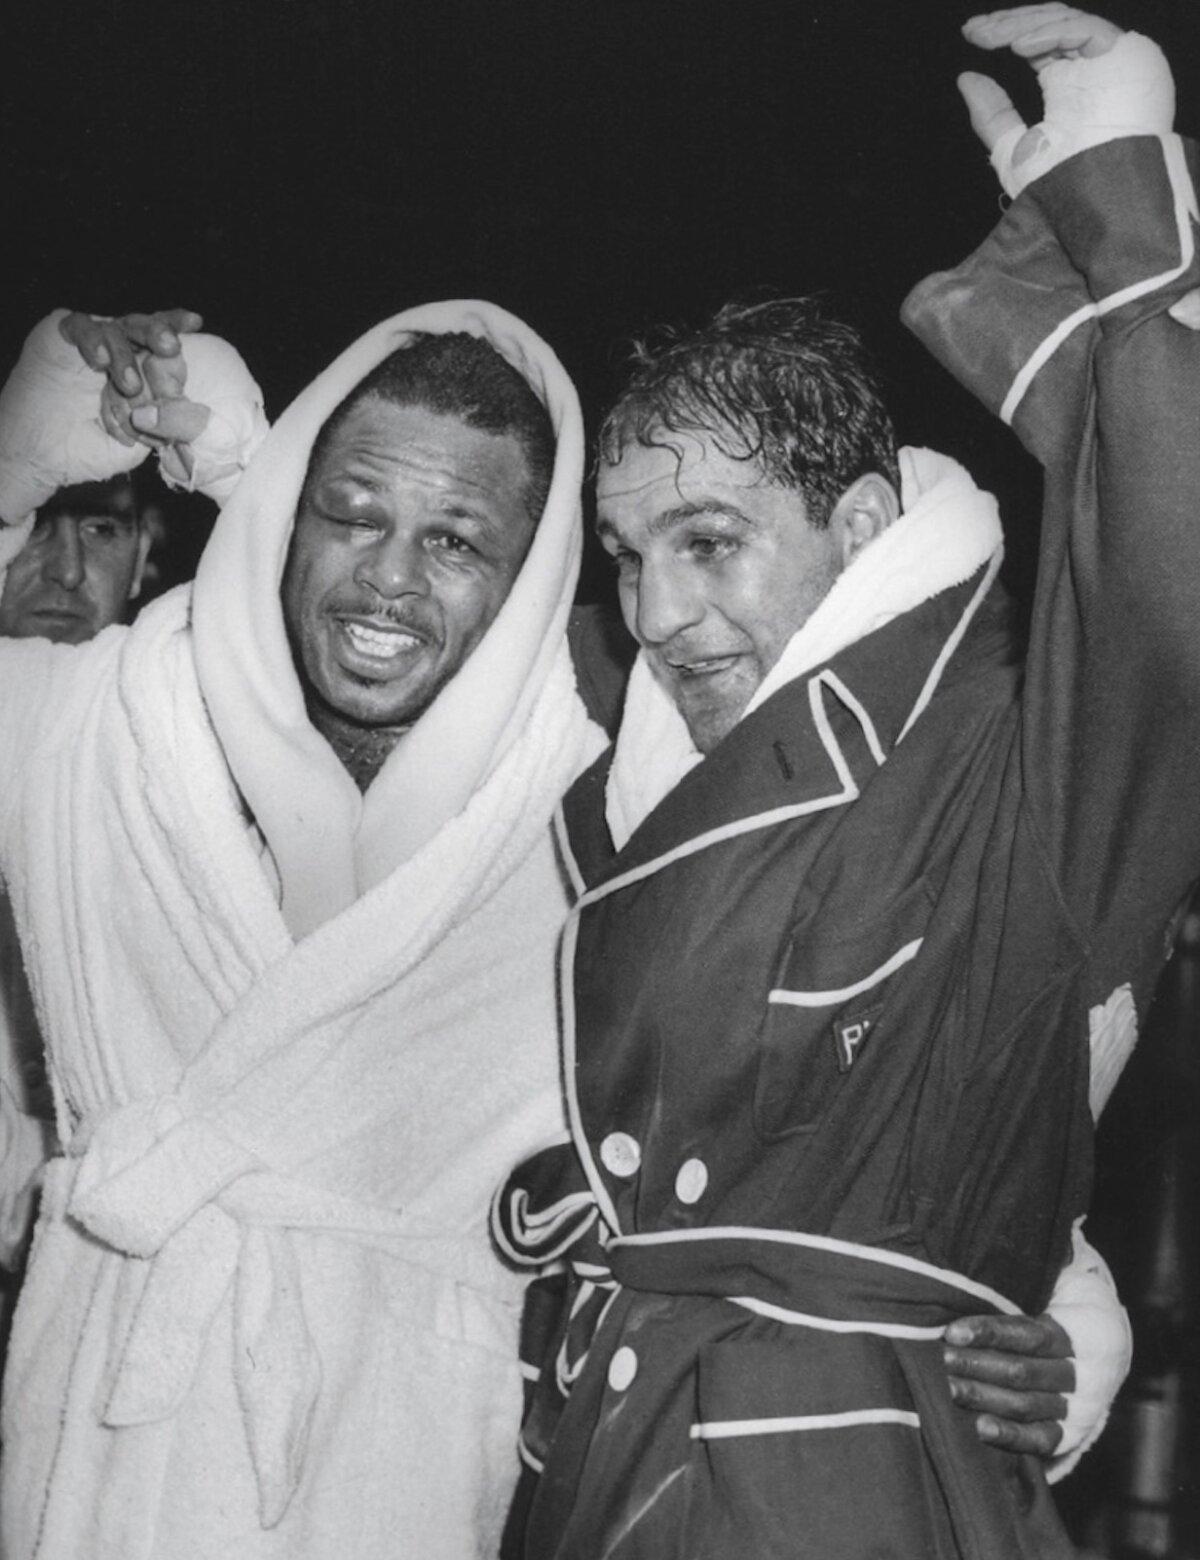 Keeping his title as heavyweight champion of the world, Marciano defeated Archie Moore on September 21, 1955. “Archie Moore and Rocky Marciano” photographed by Osvaldo Salas, 1956. Smithsonian American Art Museum, Washington. (Smithsonian American Art Museum)